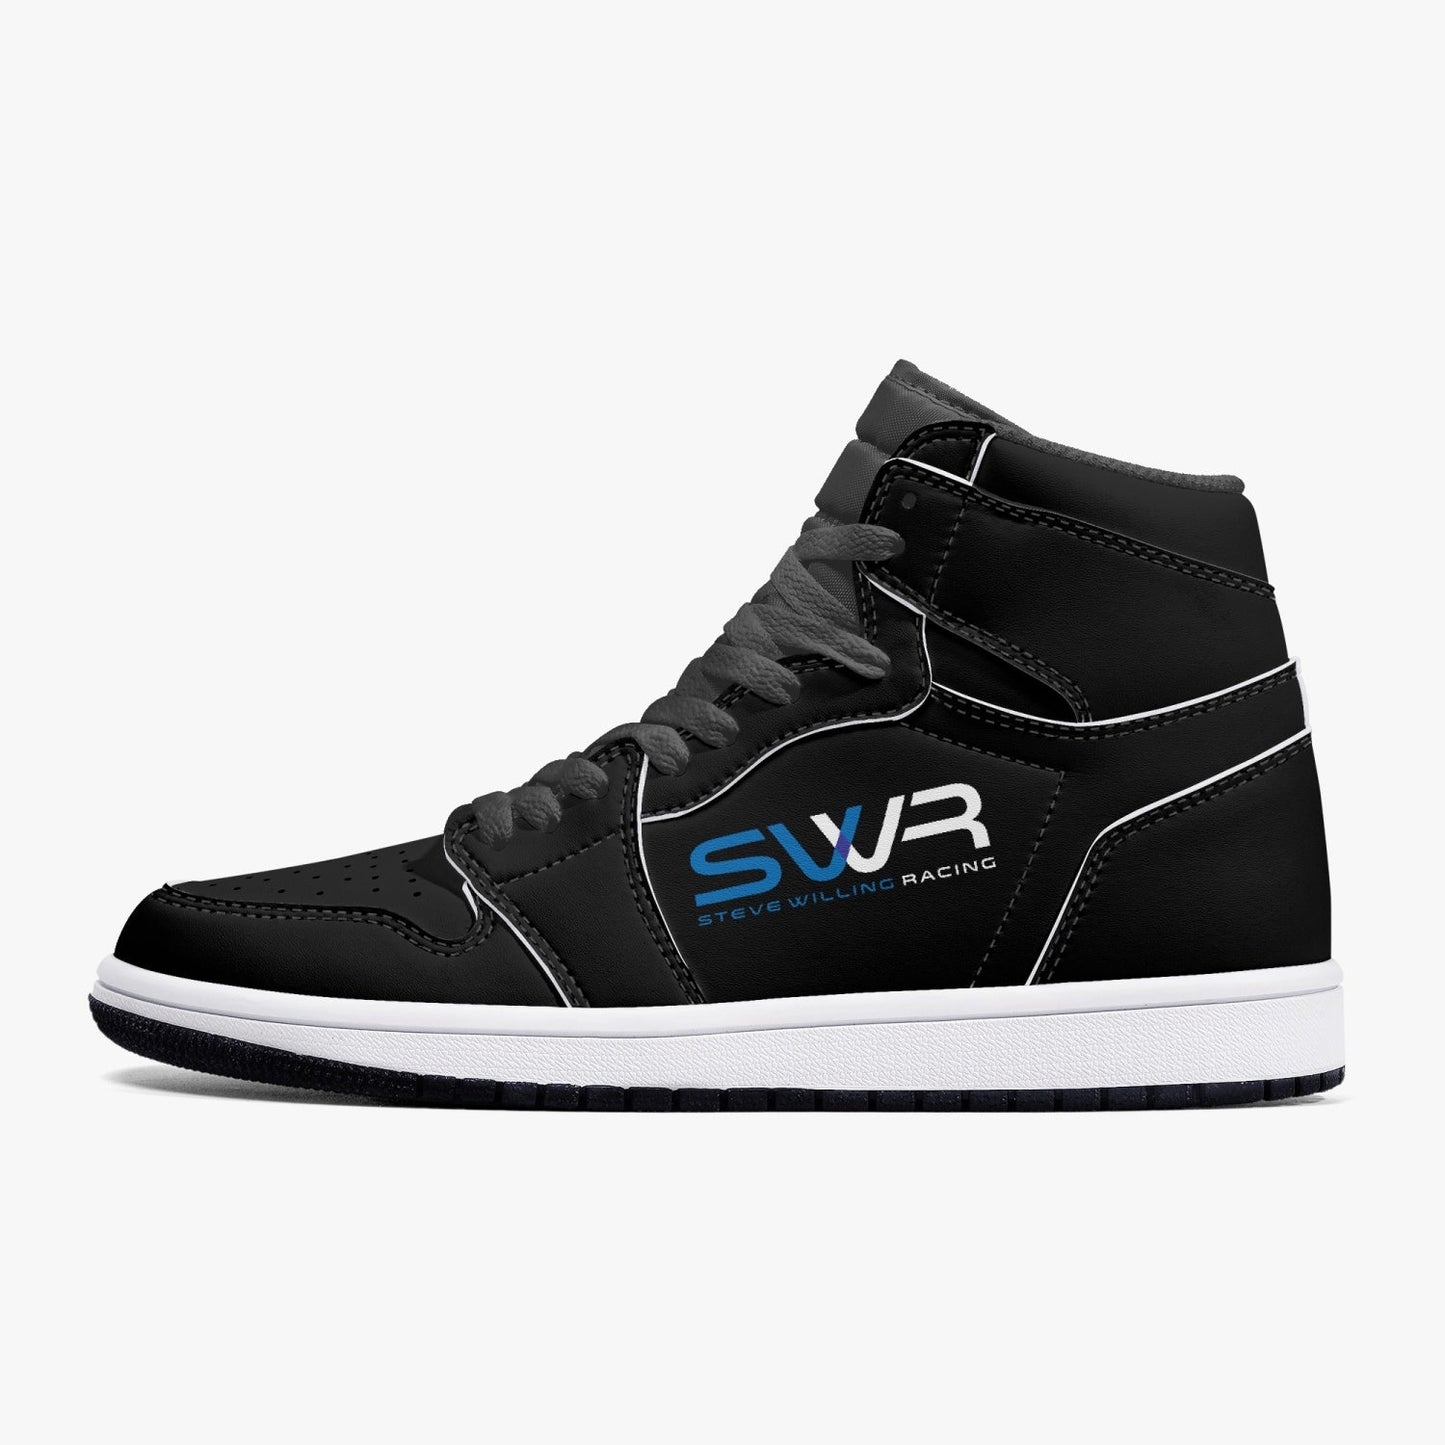 STEVE WILLING F2 MARCH version 3 High-Top Leather Sneakers - full carbon